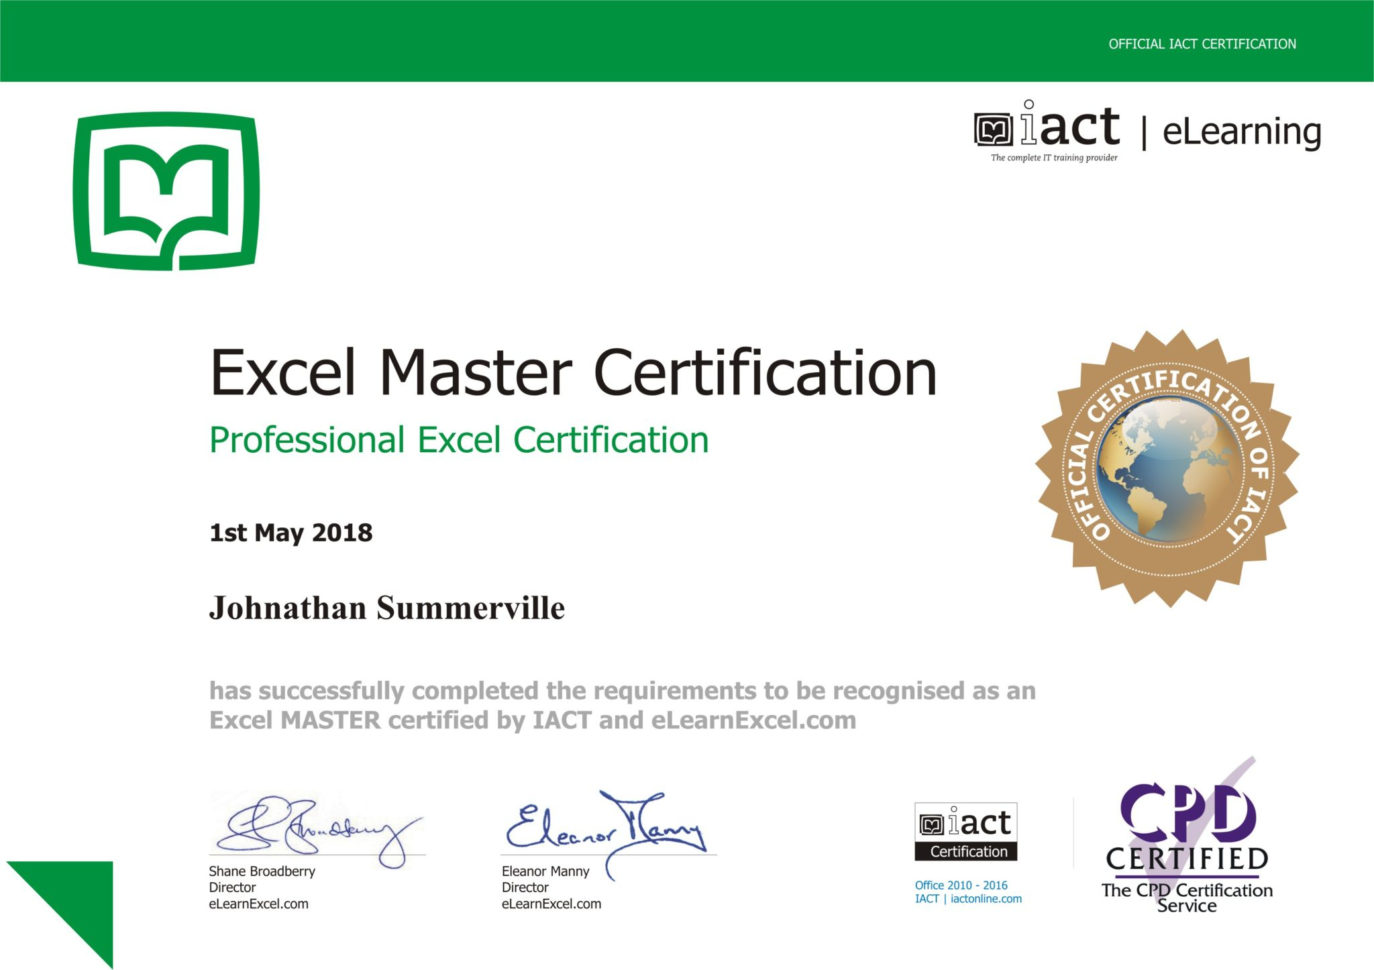 free microsoft excel certification training